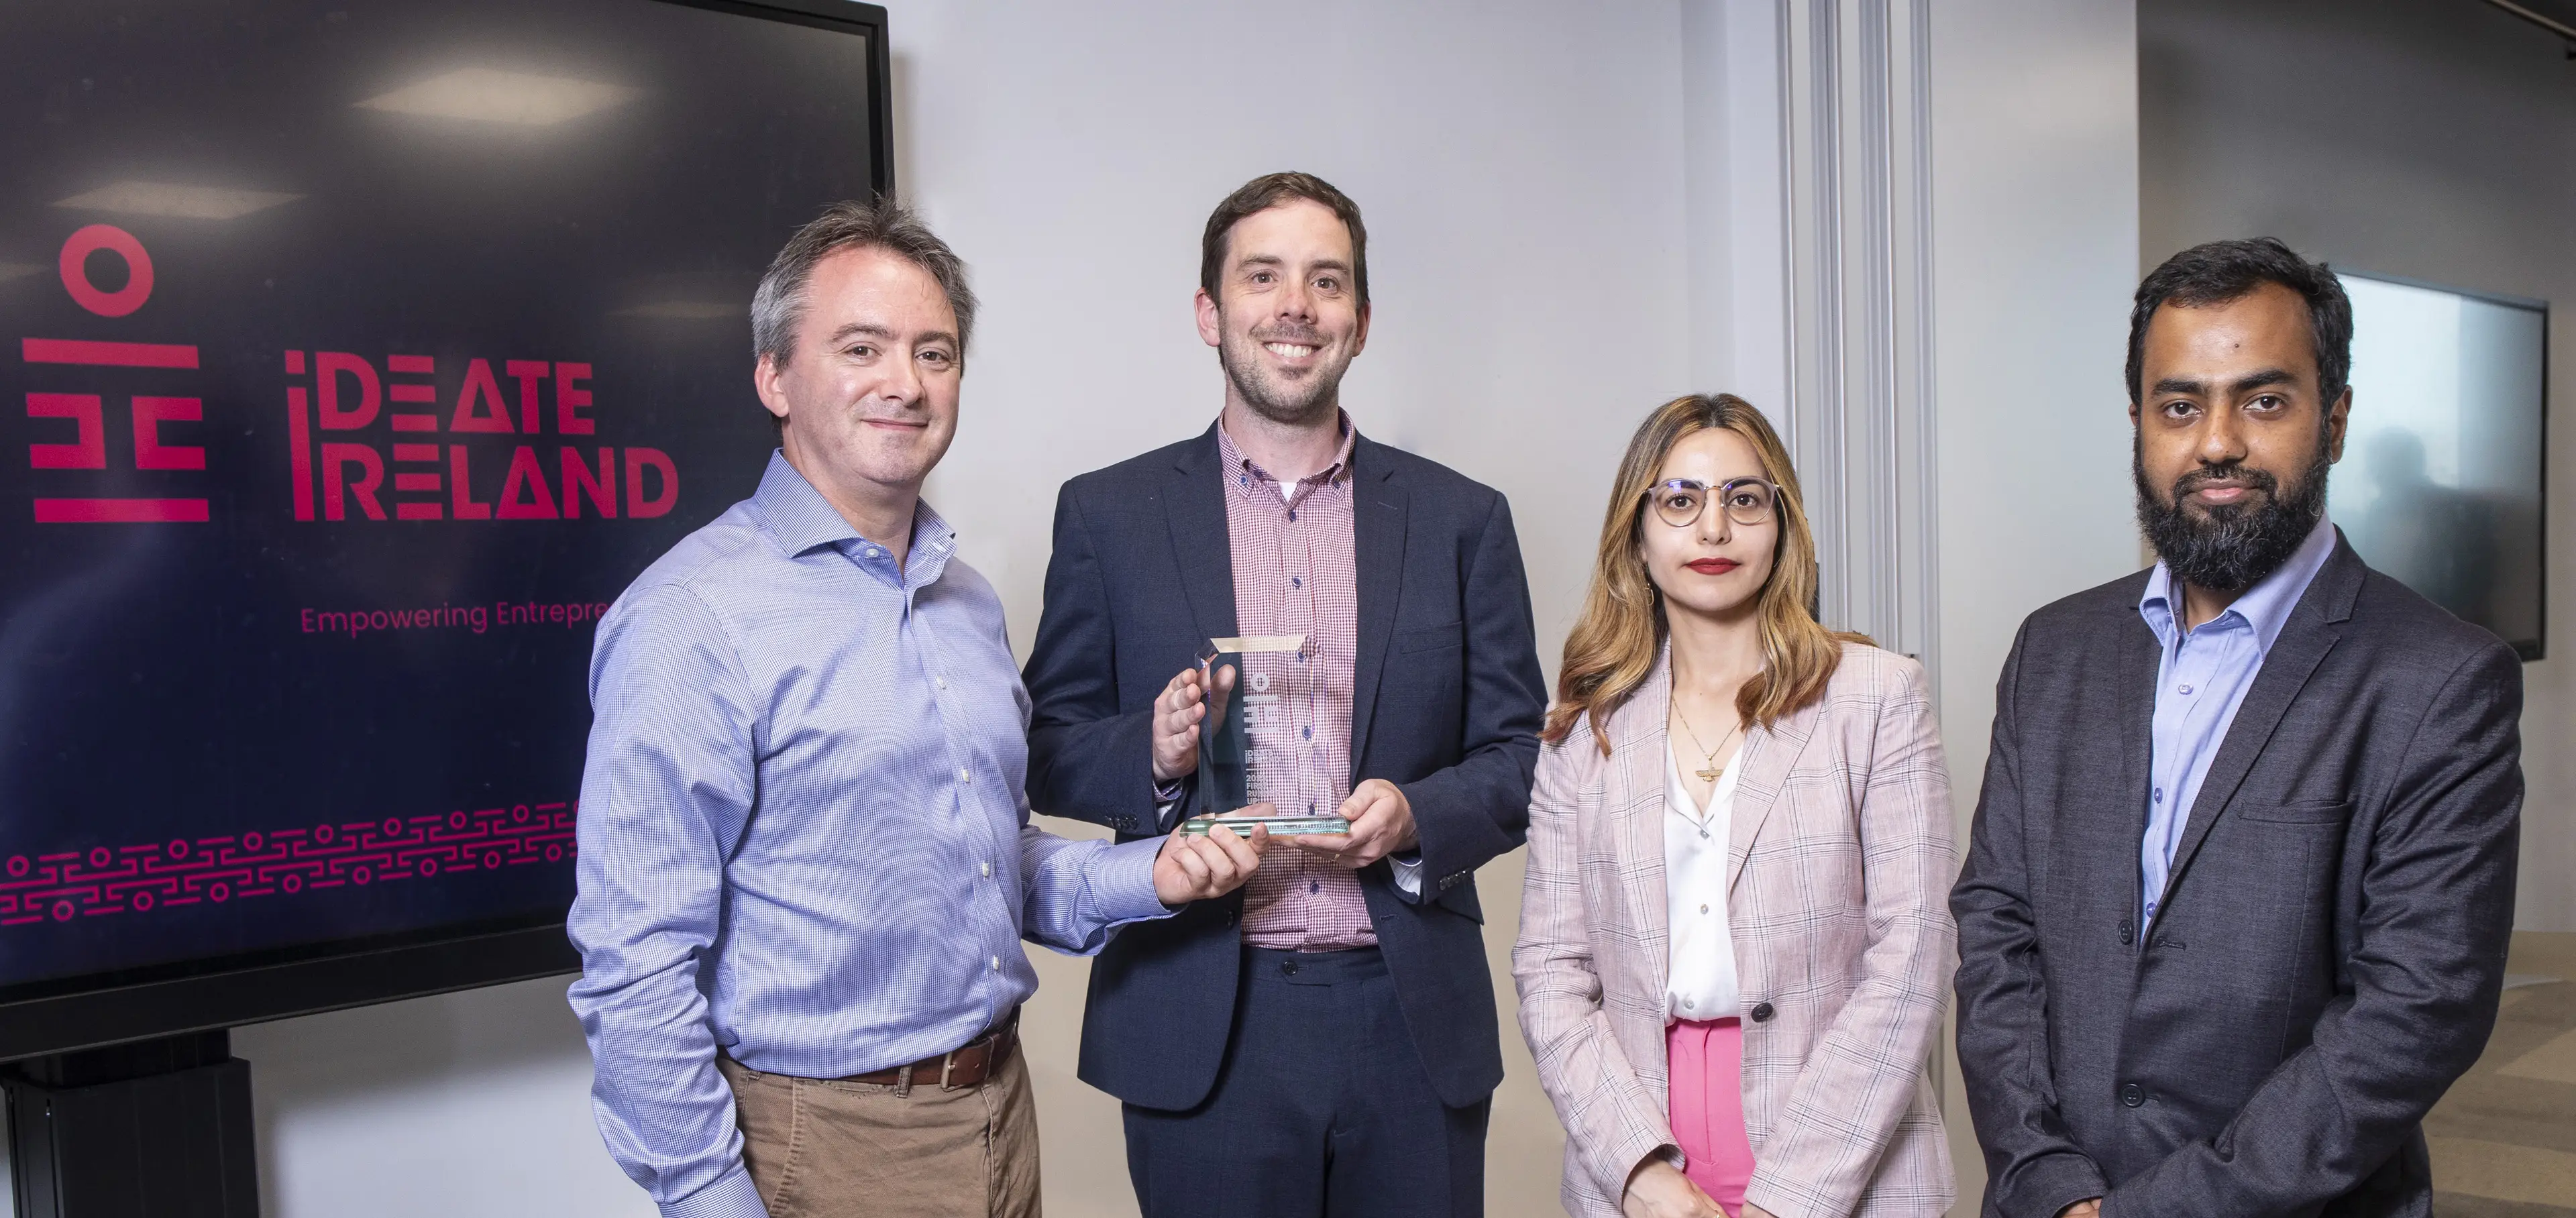 Pictured left to right is Eamonn Sayers, Guinness Enterprise Centre with first runners-up LEP Biomedical, led by Dr. Alan Hibbitts, Dr. Golestan Salimbeigi, and Dr. Tauseef Ahmad of the Royal College of Surgeons in Ireland.